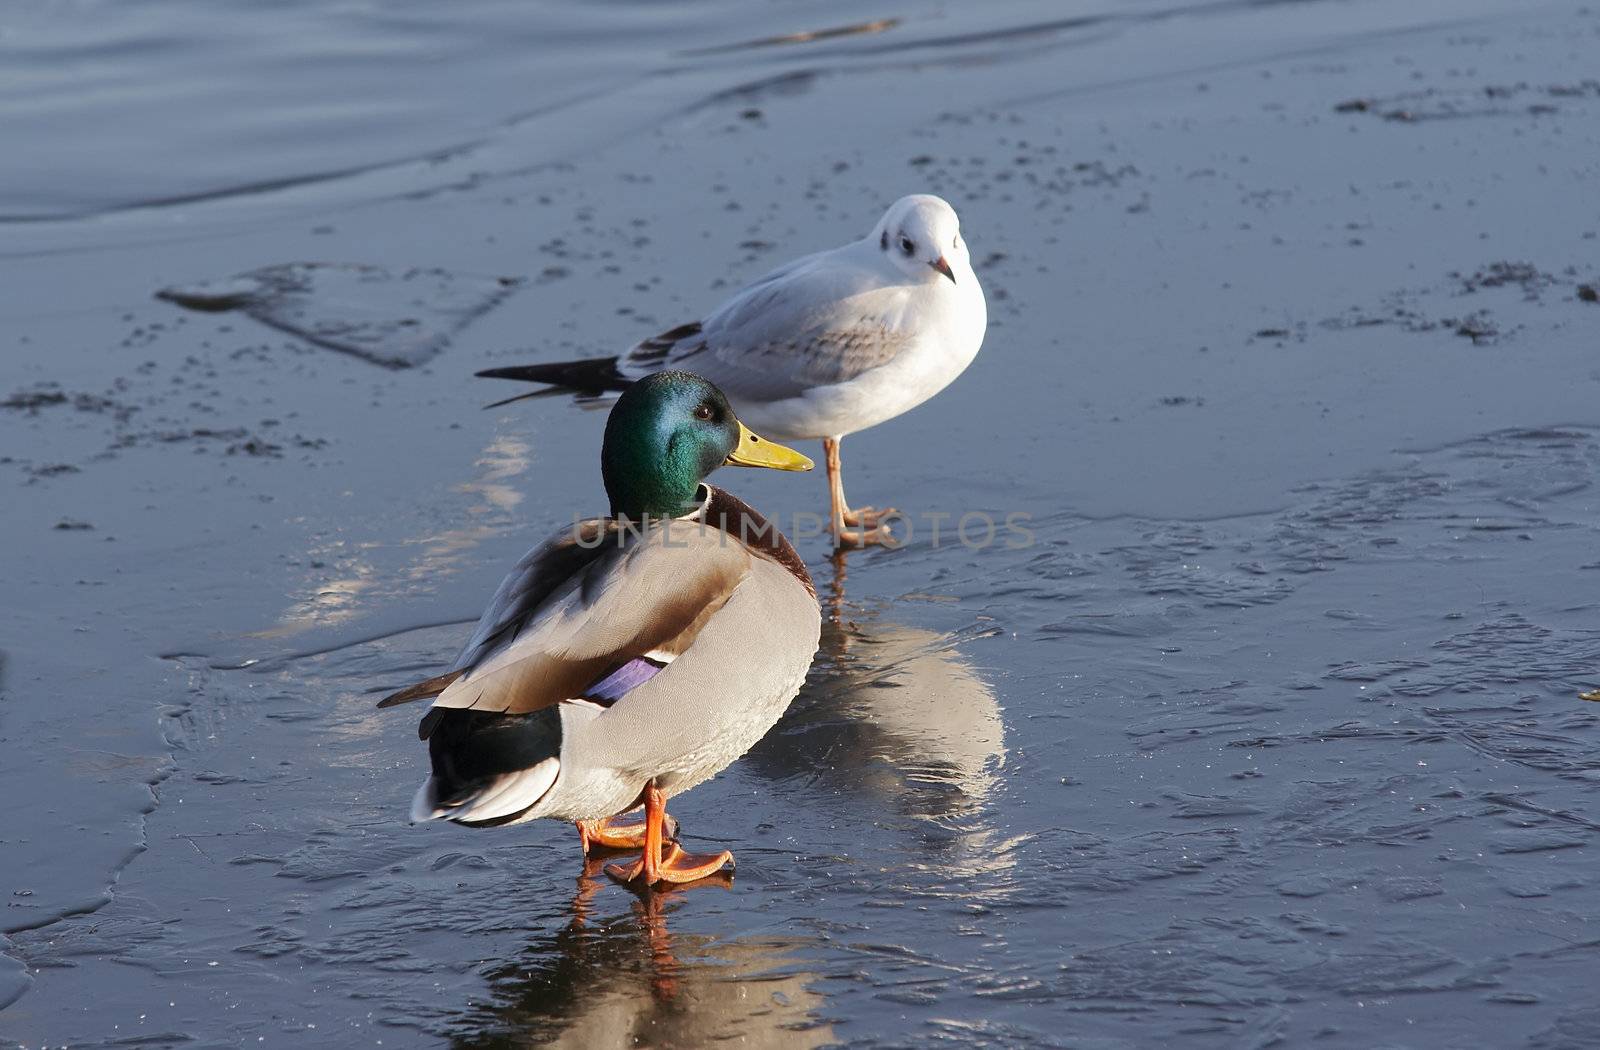 Shot of the duck and gull on the floe - ice-float